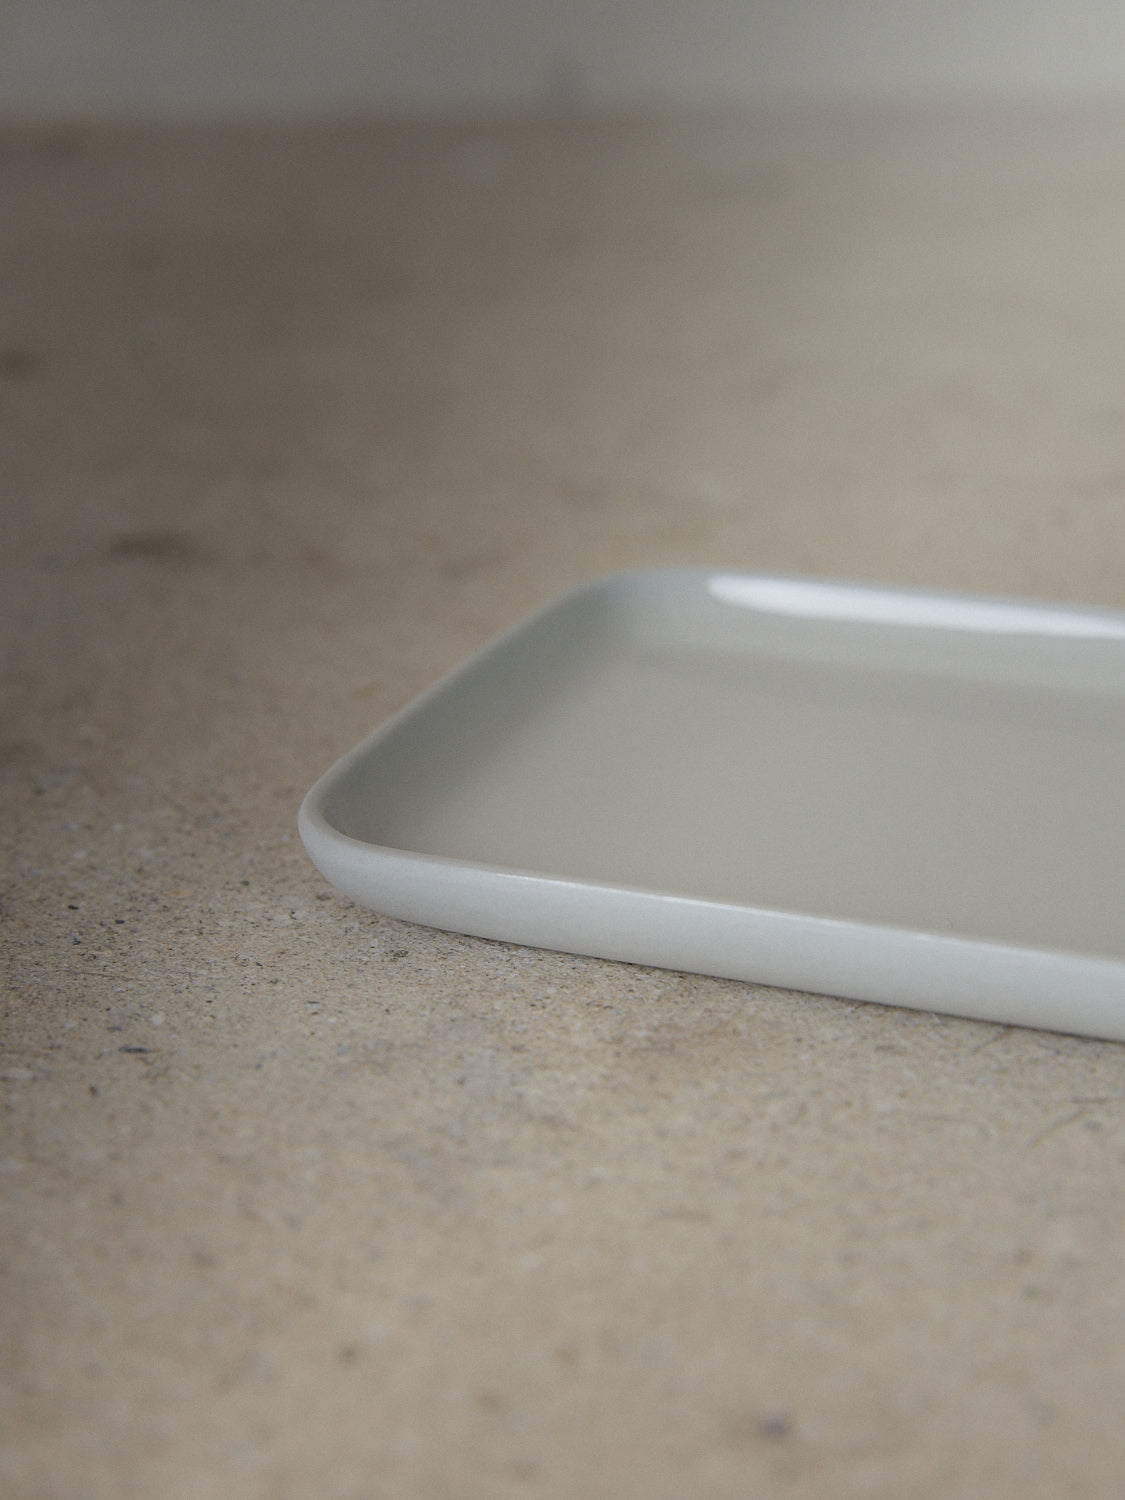 Cose Tray. A study in refined simplicity, the Cose Tray by Bertrand Lejoly for Serax adds subtle luxury to any bathroom or kitchen.